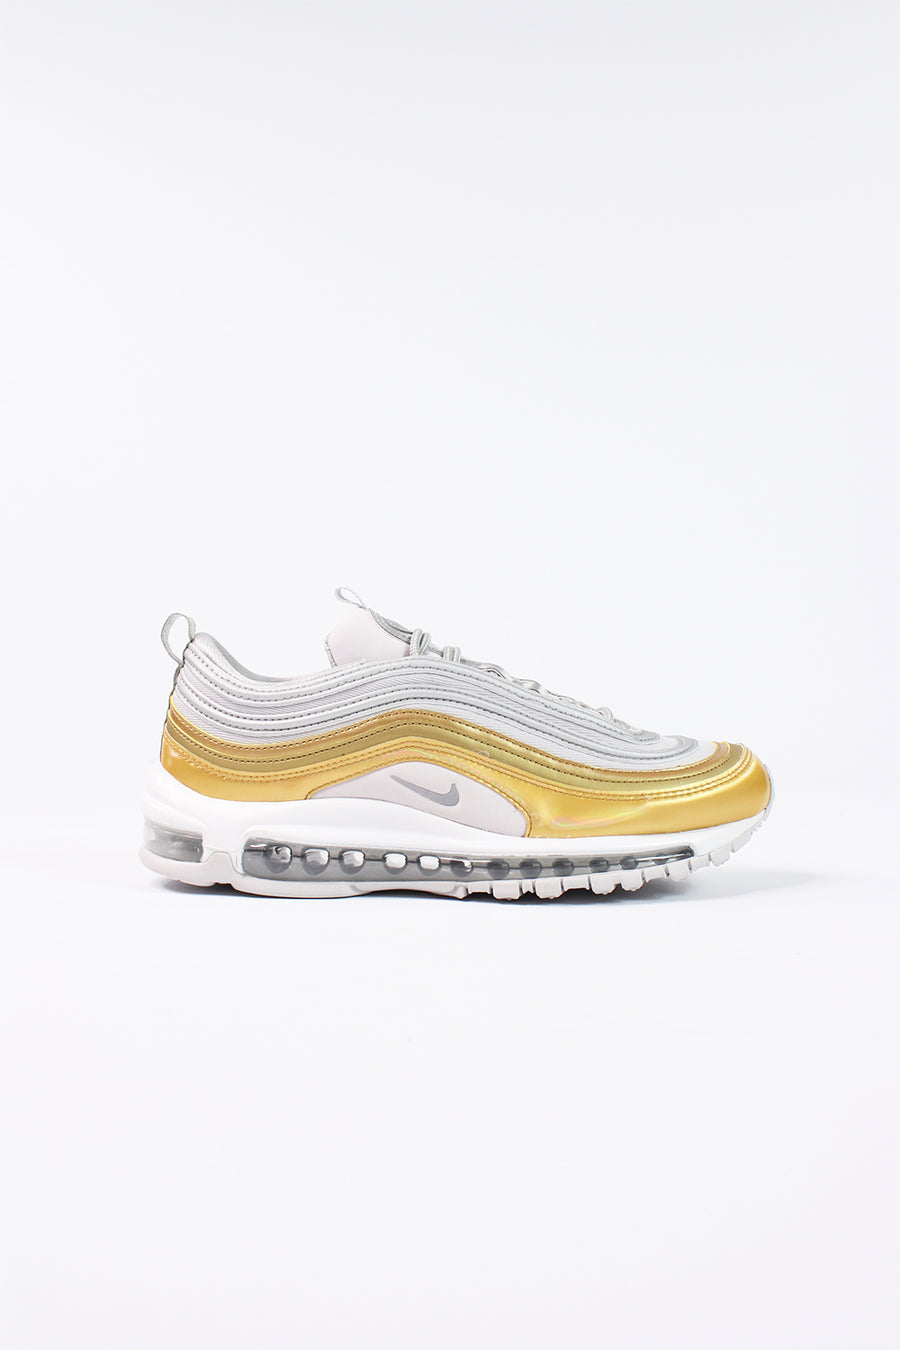 air max 97 gold limited edition